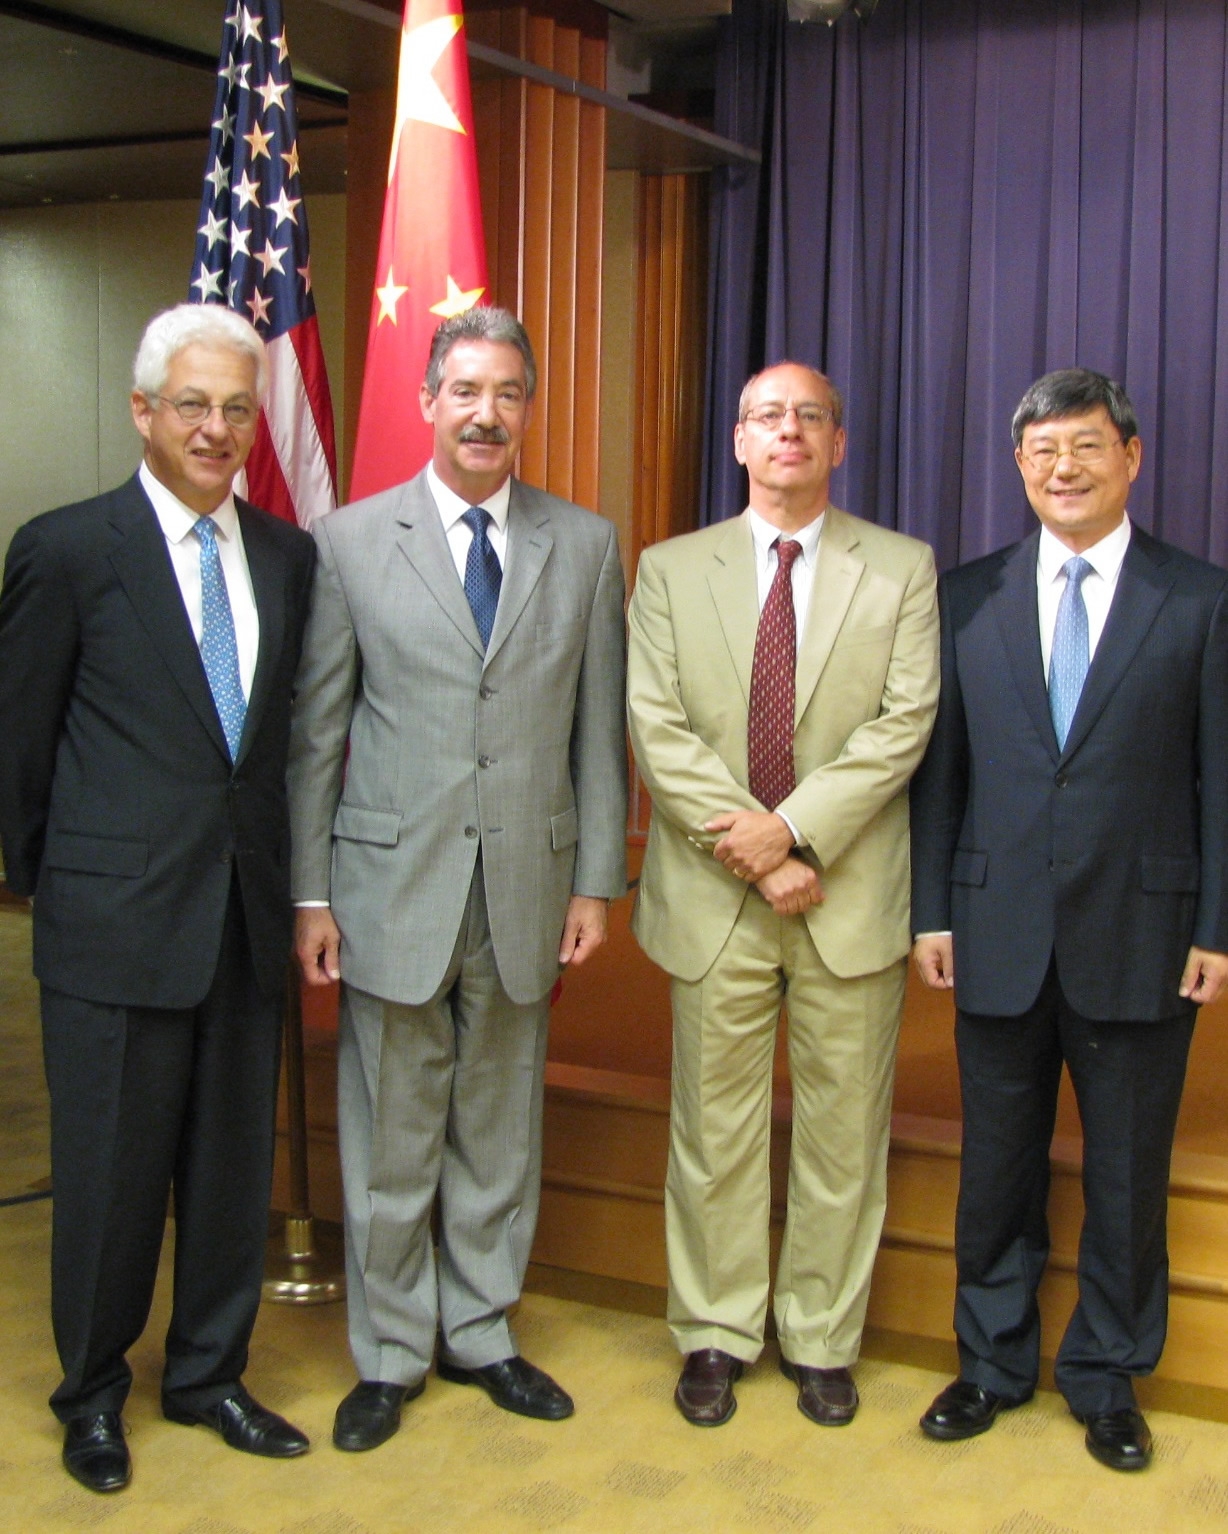 Deputy Attorney General James M. Cole met with the Chinese NDRC Vice Chairman Hu Zucai on Monday, September 24, 2012.